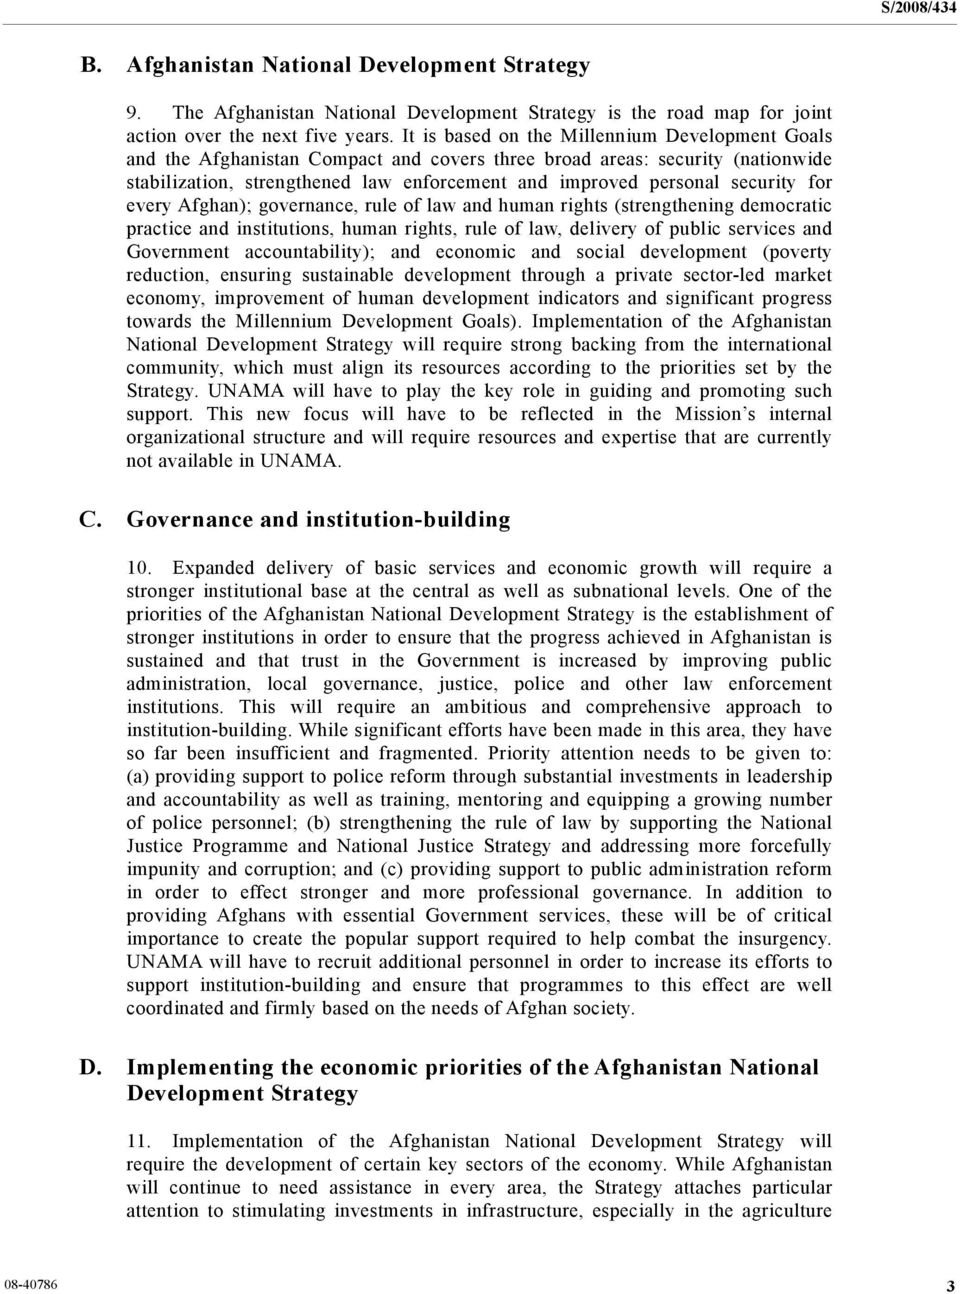 security for every Afghan); governance, rule of law and human rights (strengthening democratic practice and institutions, human rights, rule of law, delivery of public services and Government